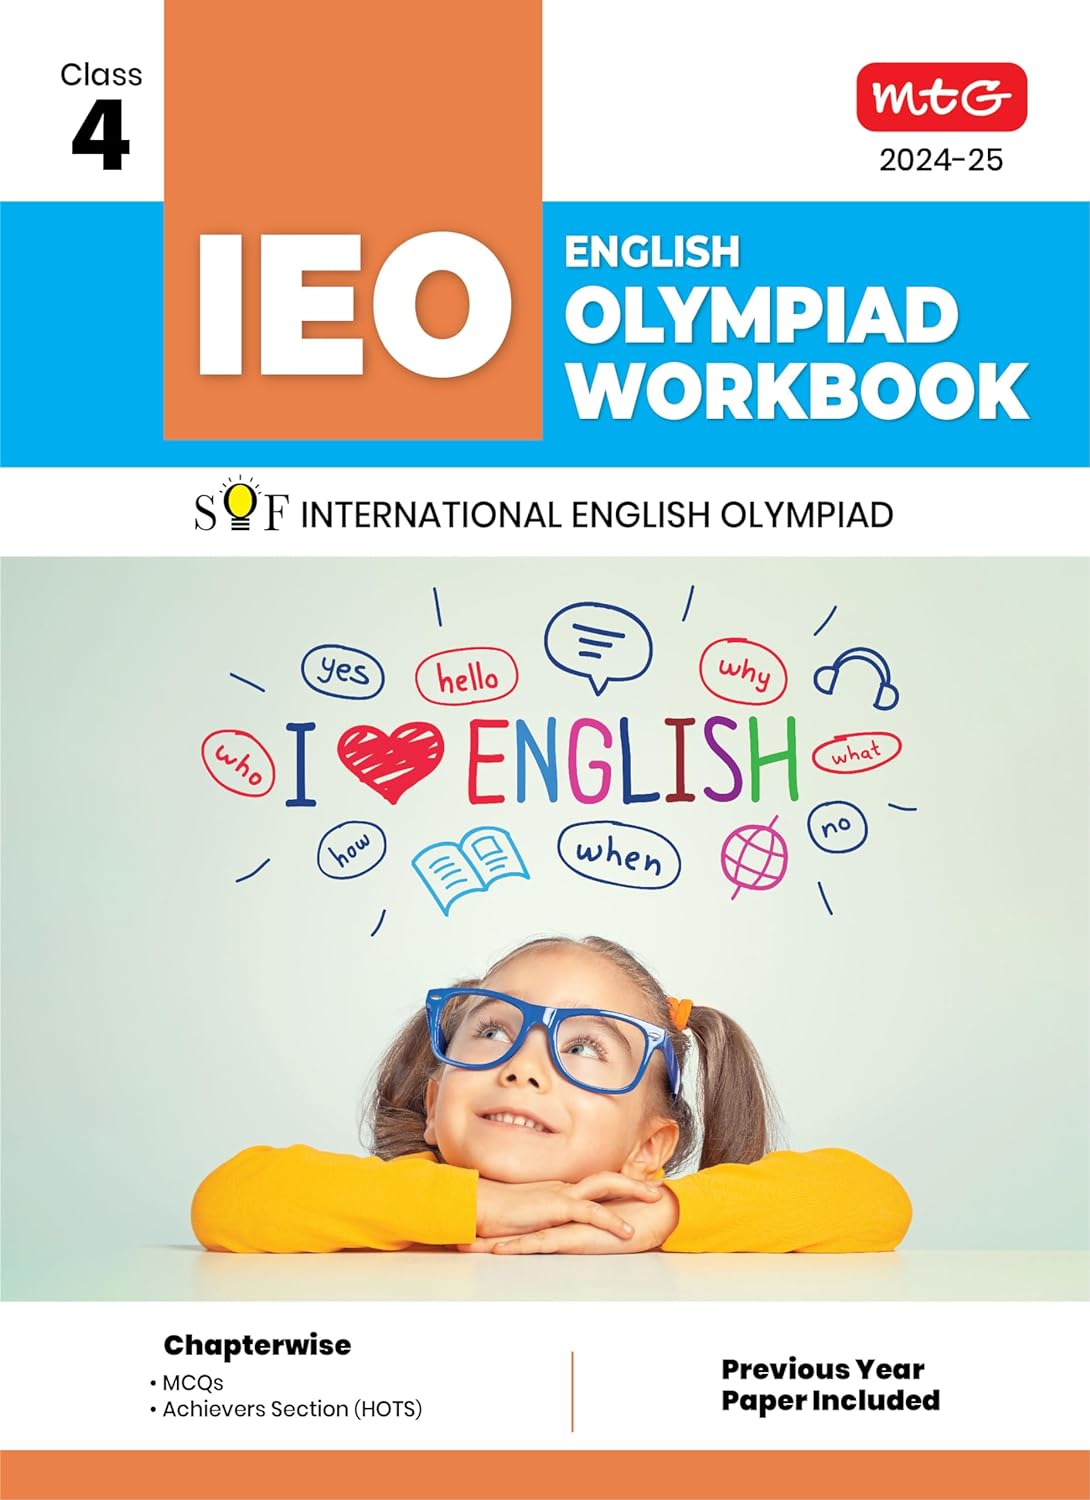 MTG Olympiad IEO English Workbook For Class 4 - Latest for 2024-25 Session